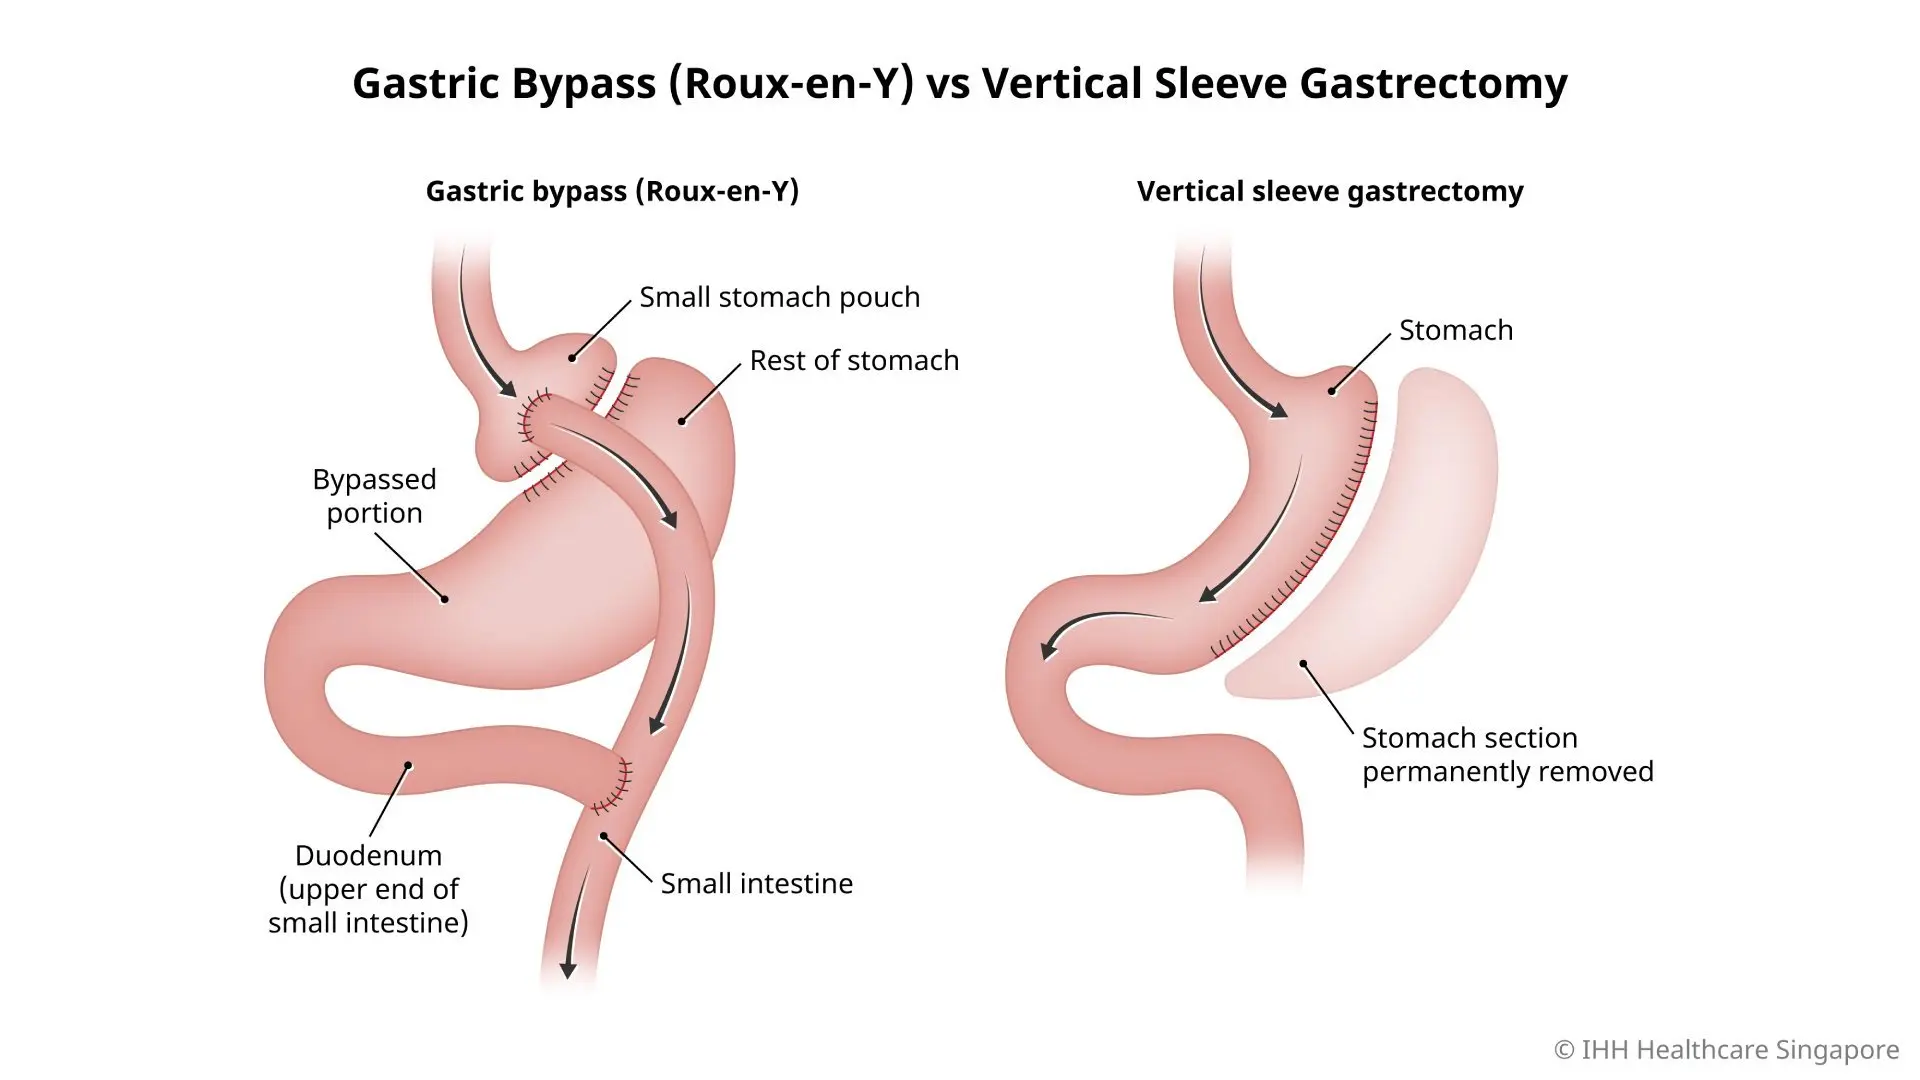 Illustration of the differences between gastric bypass (Roux-en-Y) surgery and vertical sleeve gastrectomy surgery.